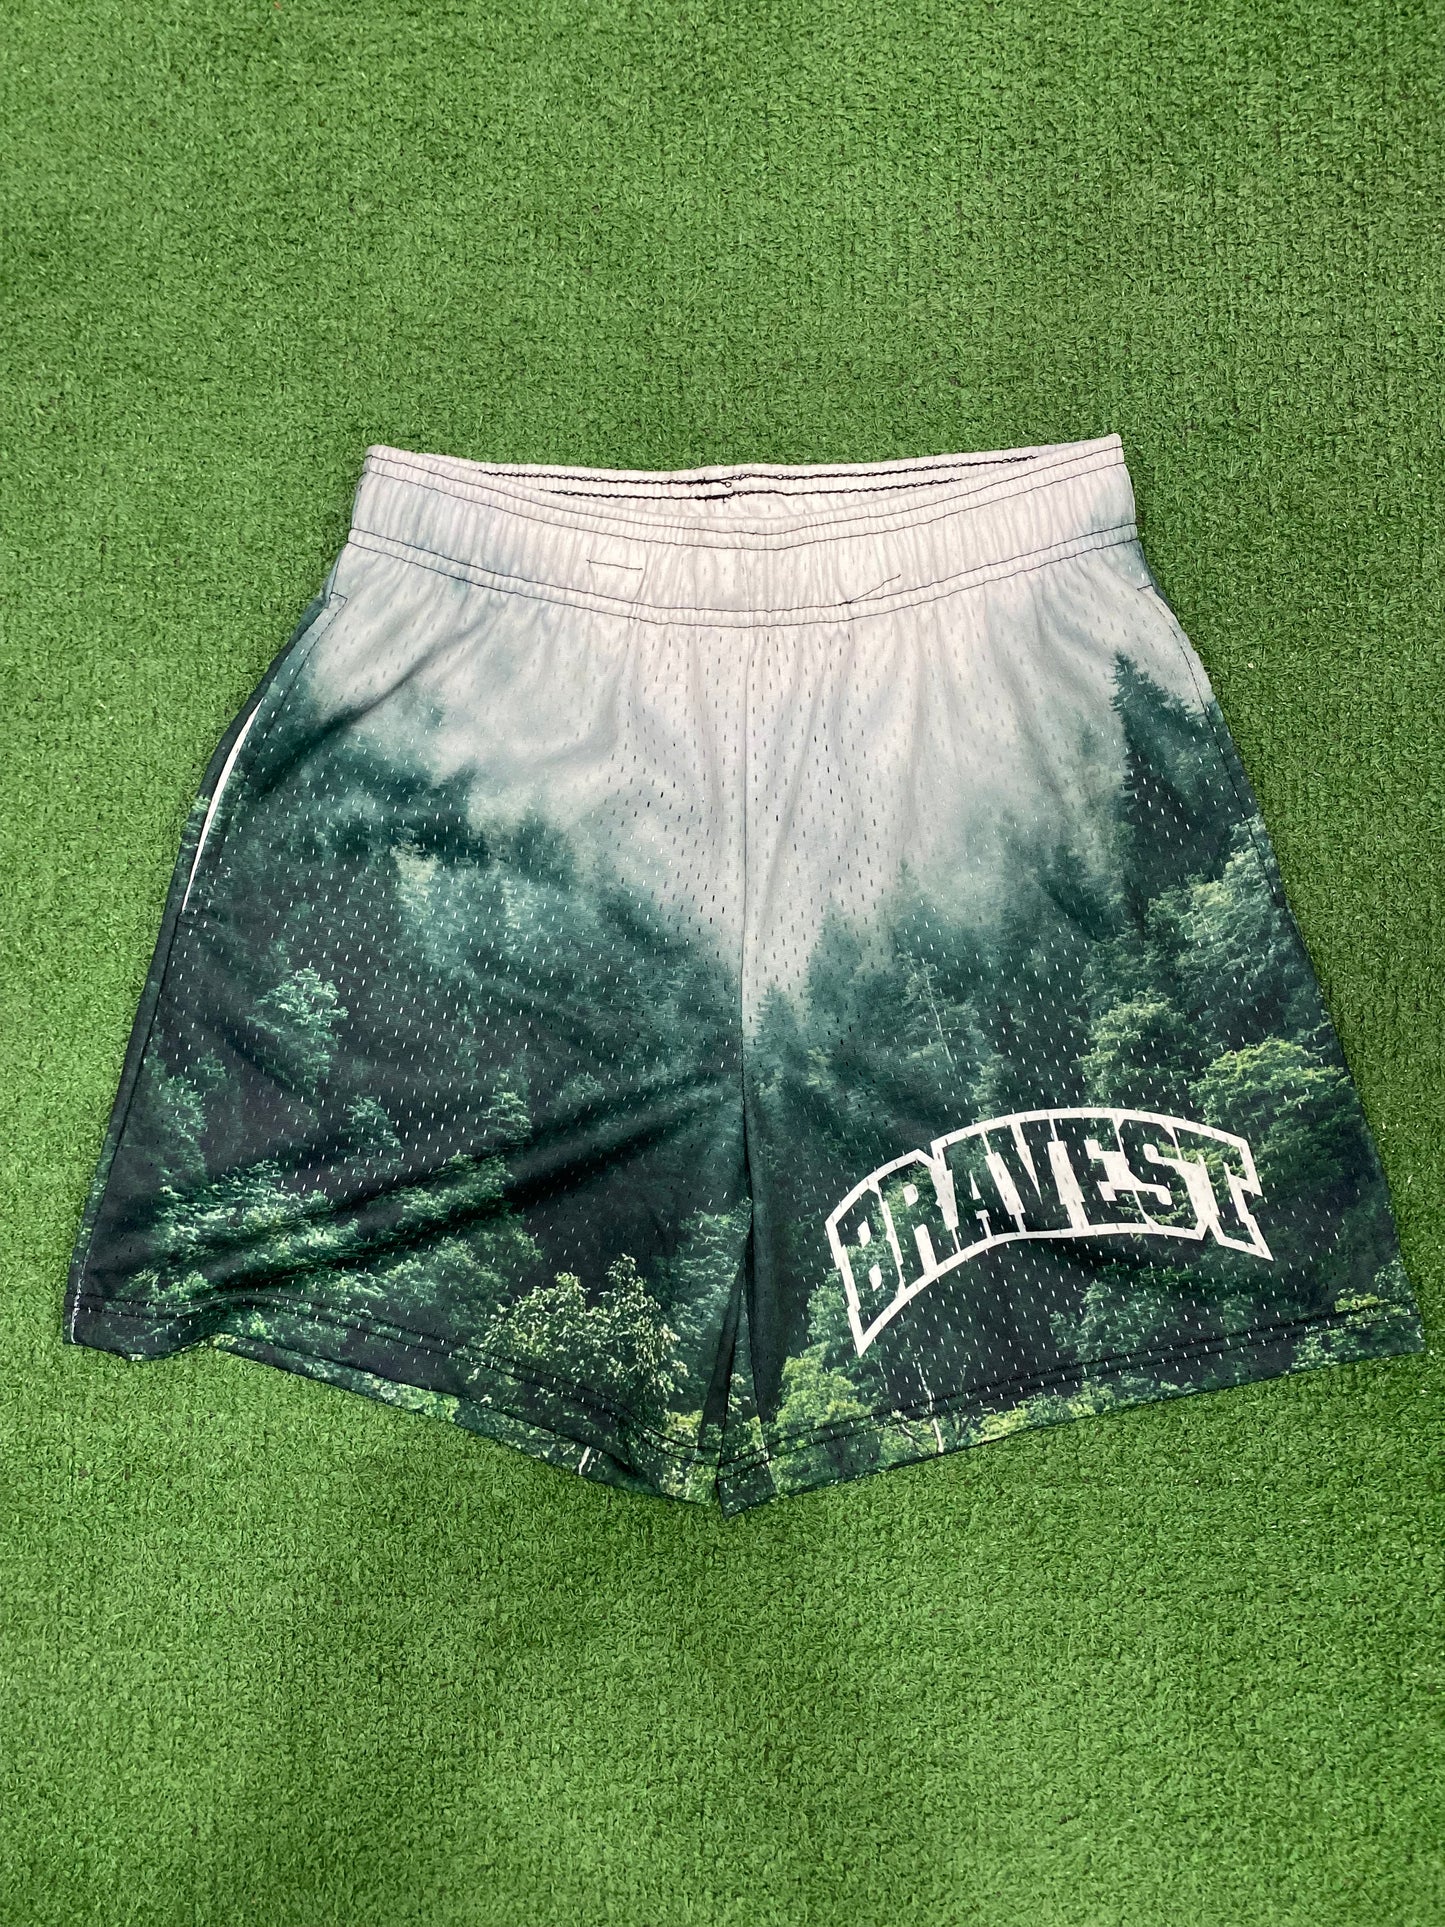 Bravest Studios Forest Shorts, Shorts - Supra Sneakers